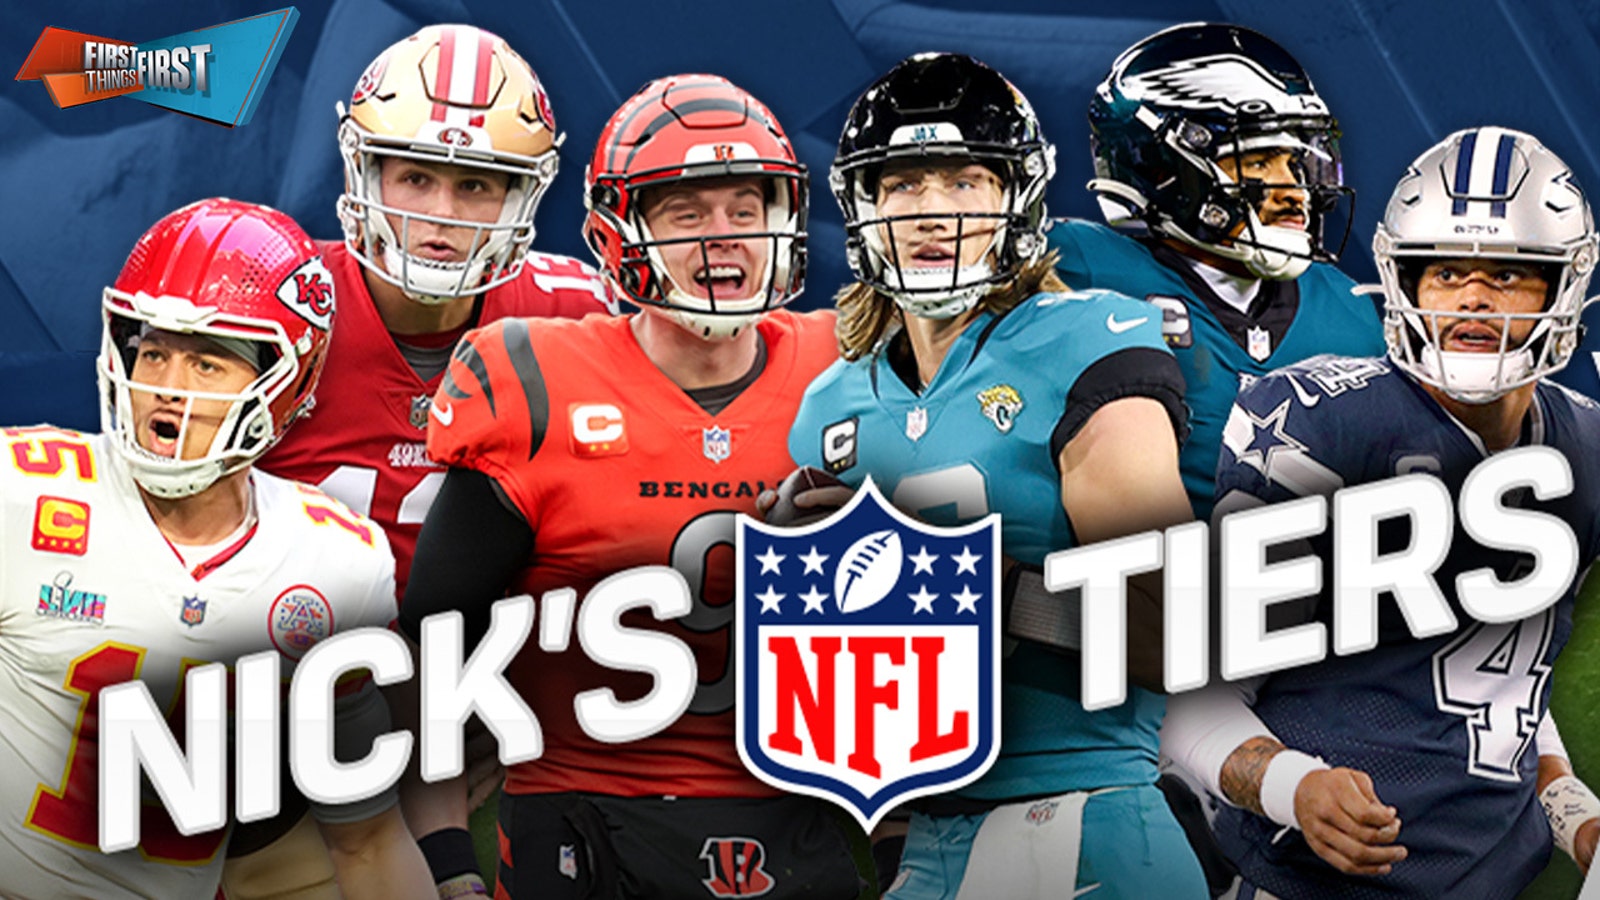 Nick's too-early NFL Tiers